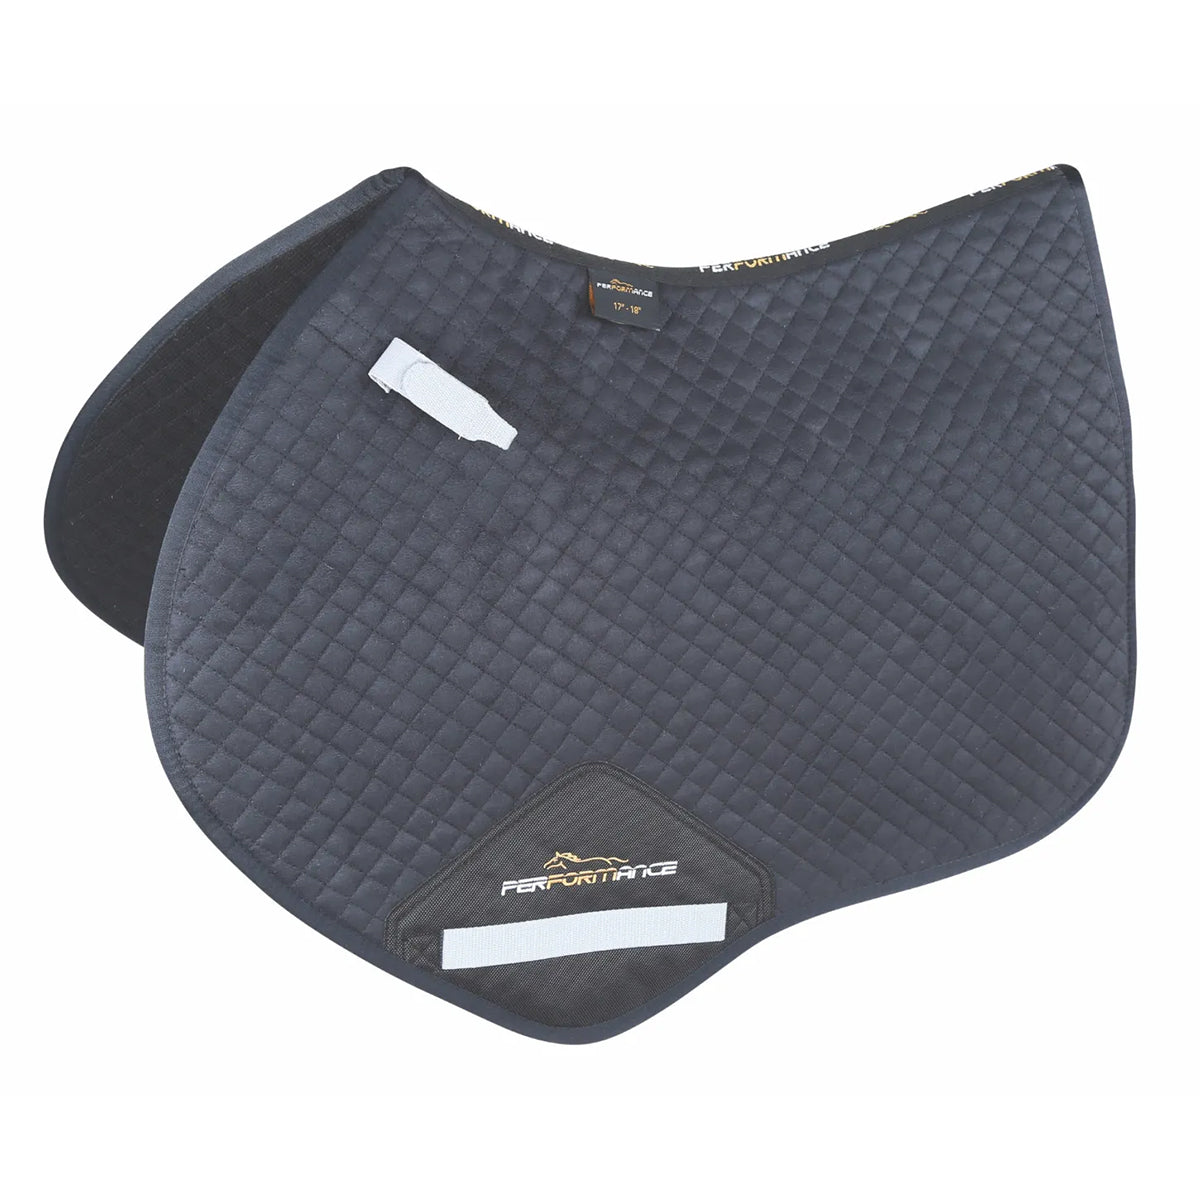 Arma Performance Suede Jumping Saddle Pads